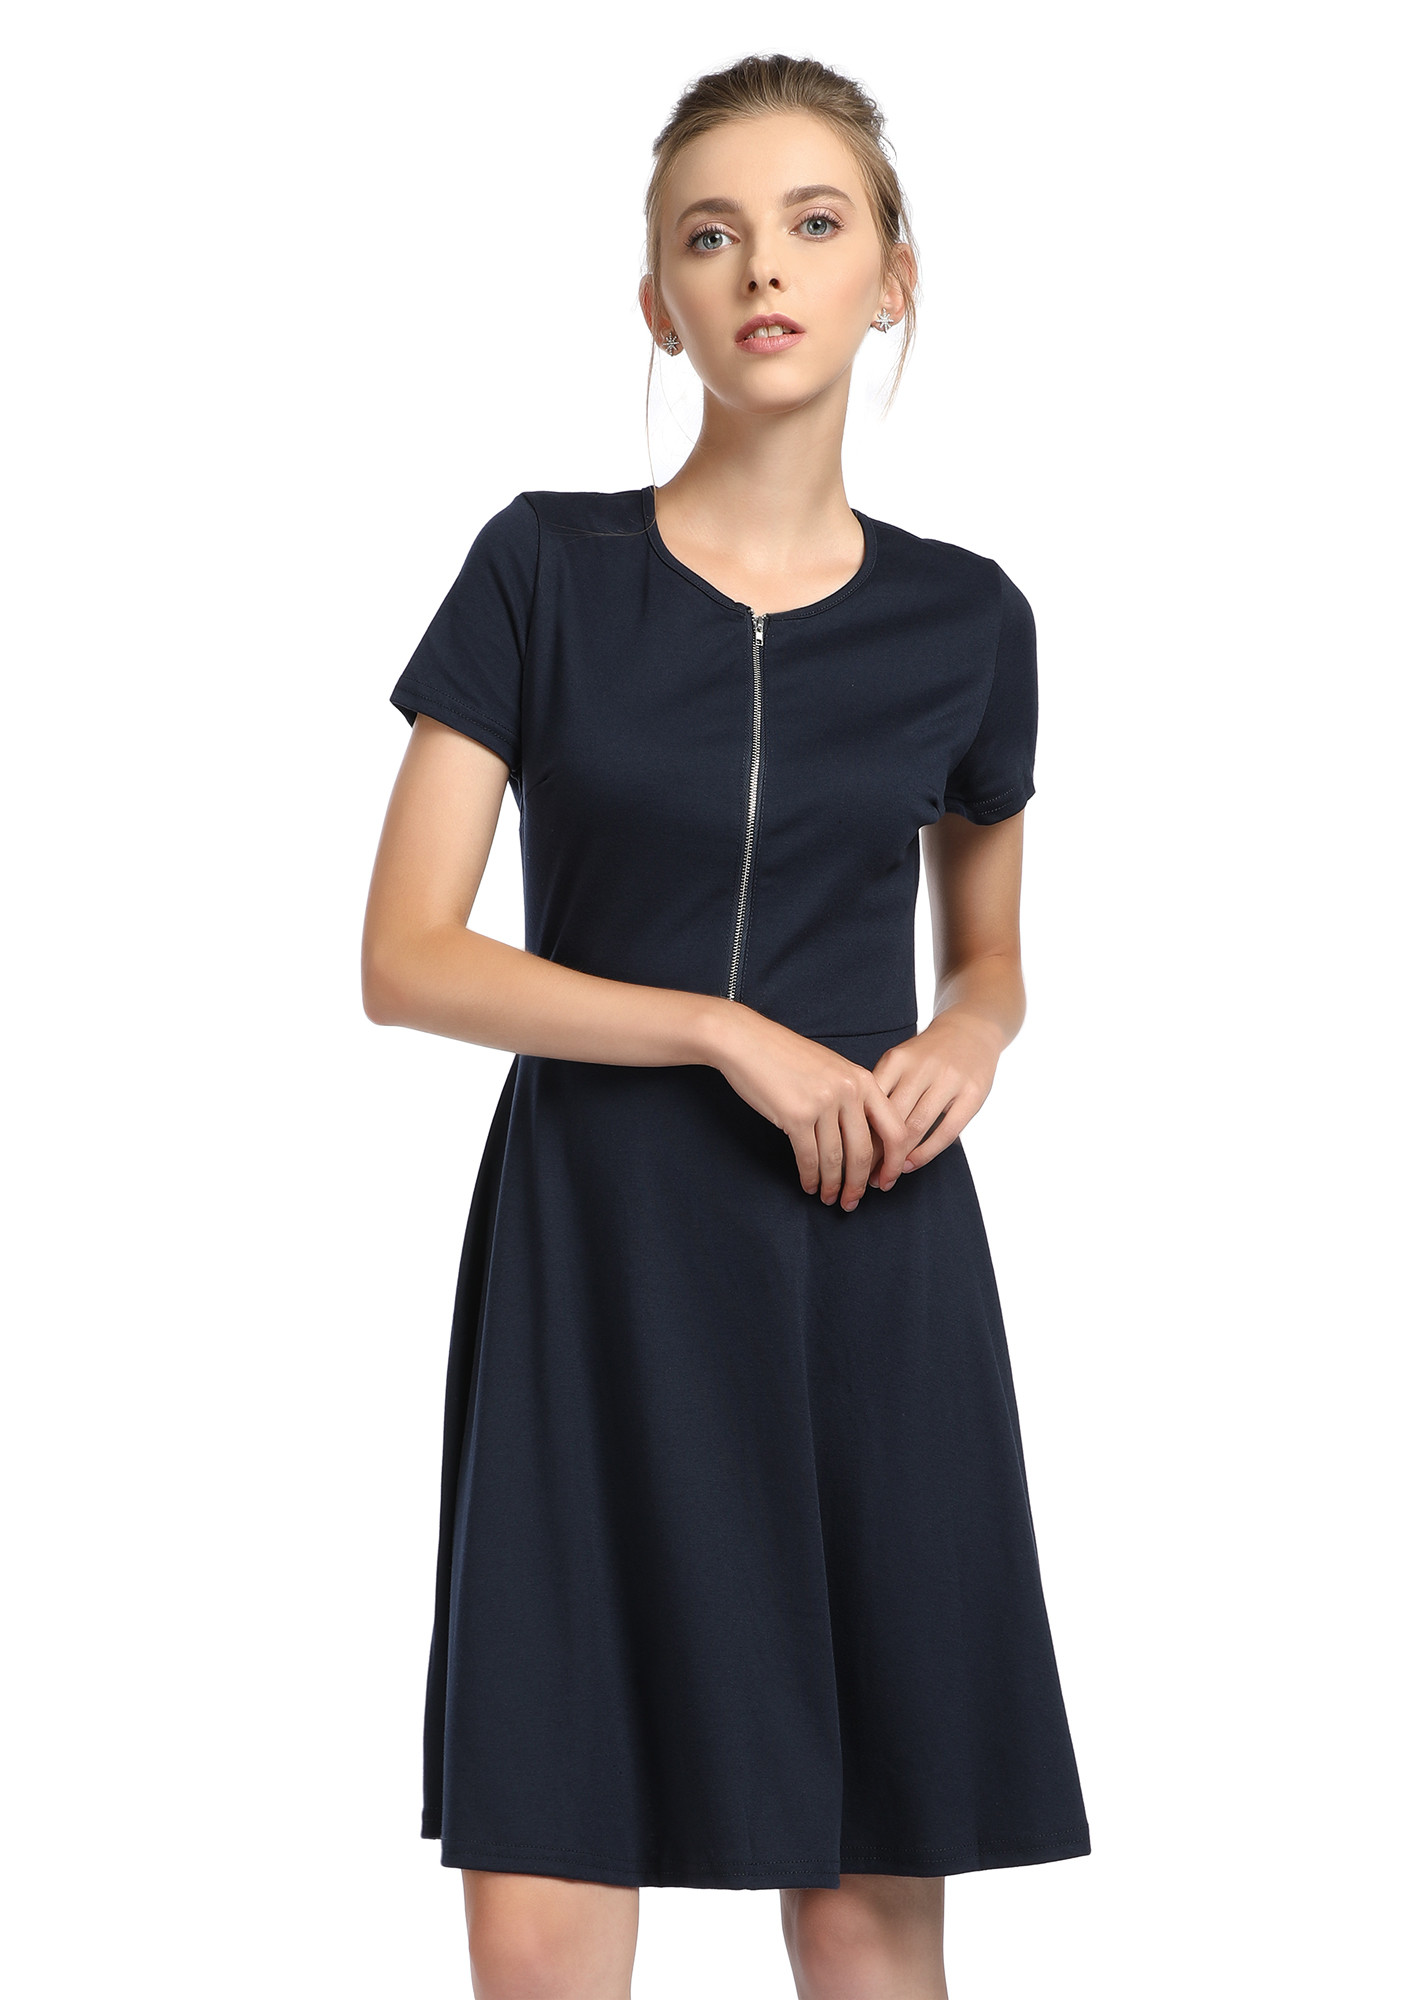 ZIPPED FROM THE FRONT NAVY SKATER DRESS